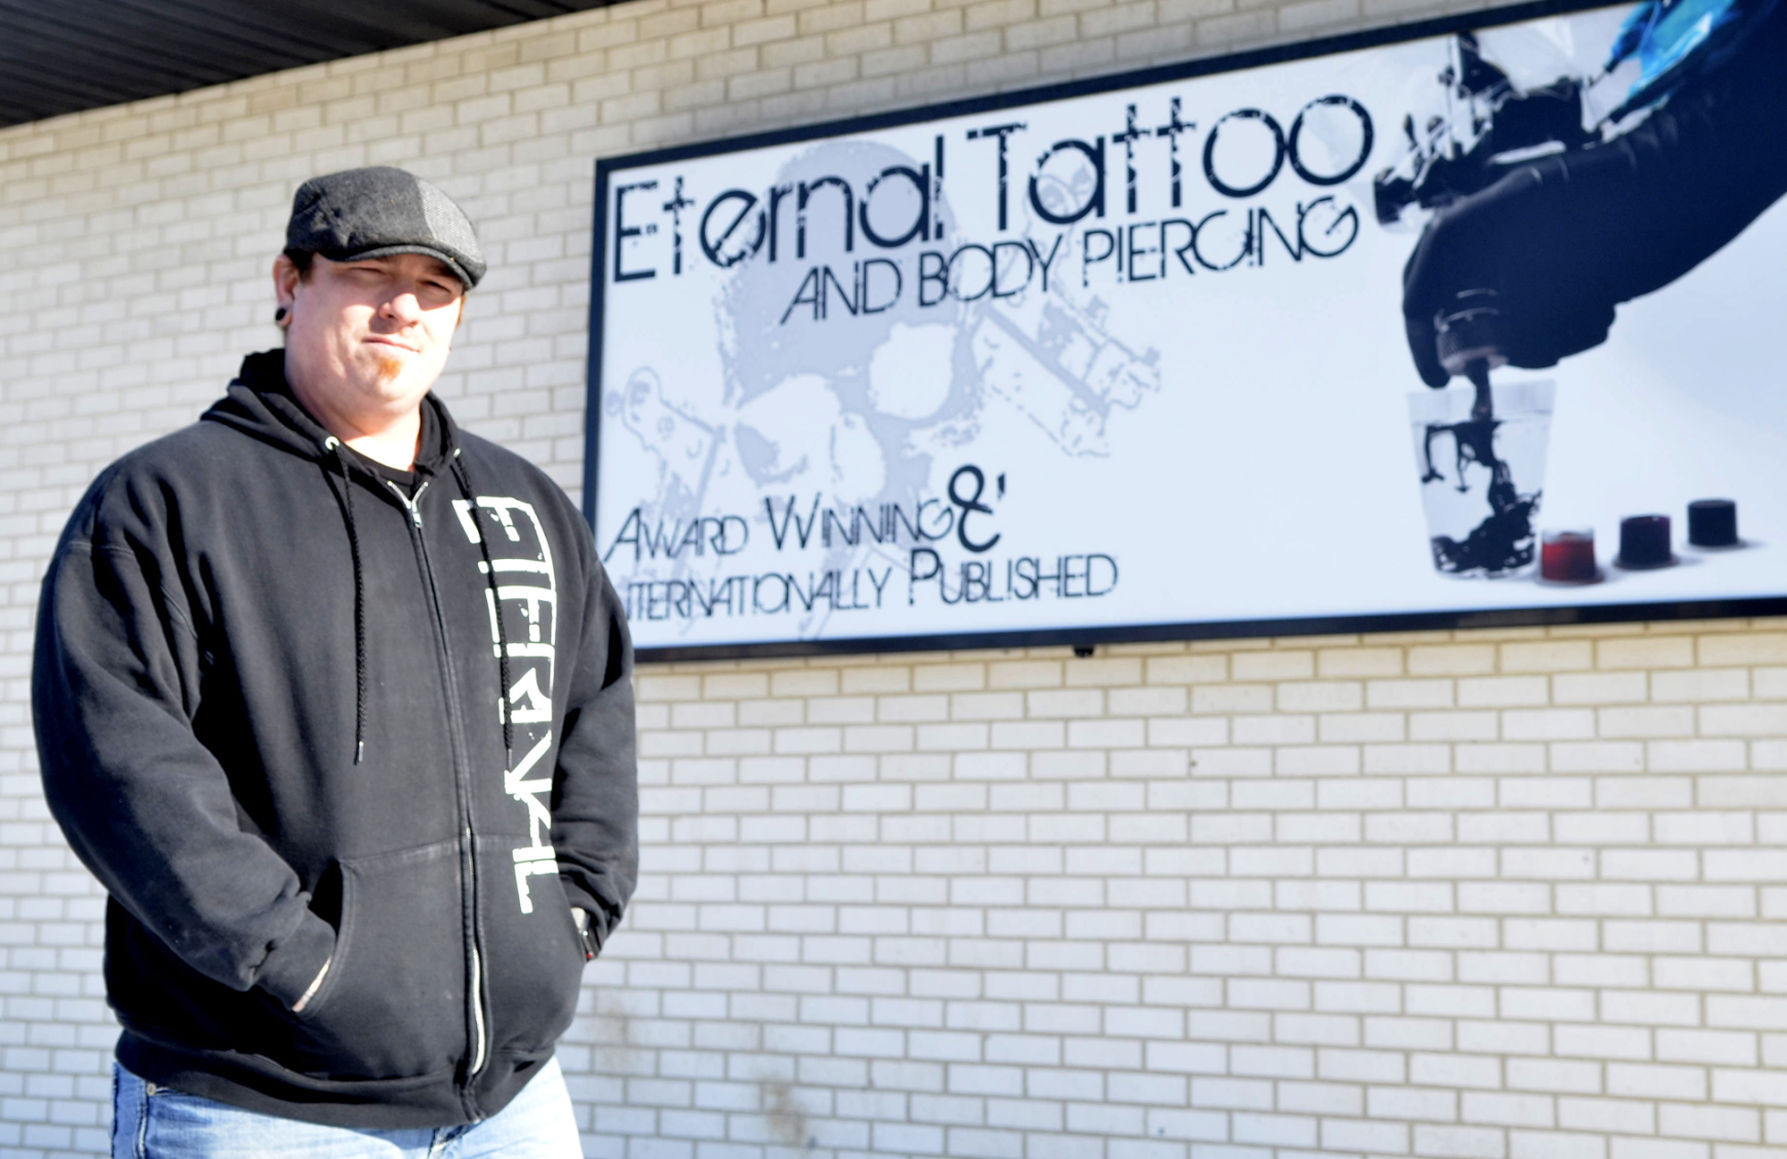 Eternal Tattoo  Body Piercing  Omaha NE  Bad Decisions Arent Eternal  NONLASER TATTOO REMOVAL by Tatt2Away  Only at Eternal Tattoo Completely  and safely remove your tattoo in only a